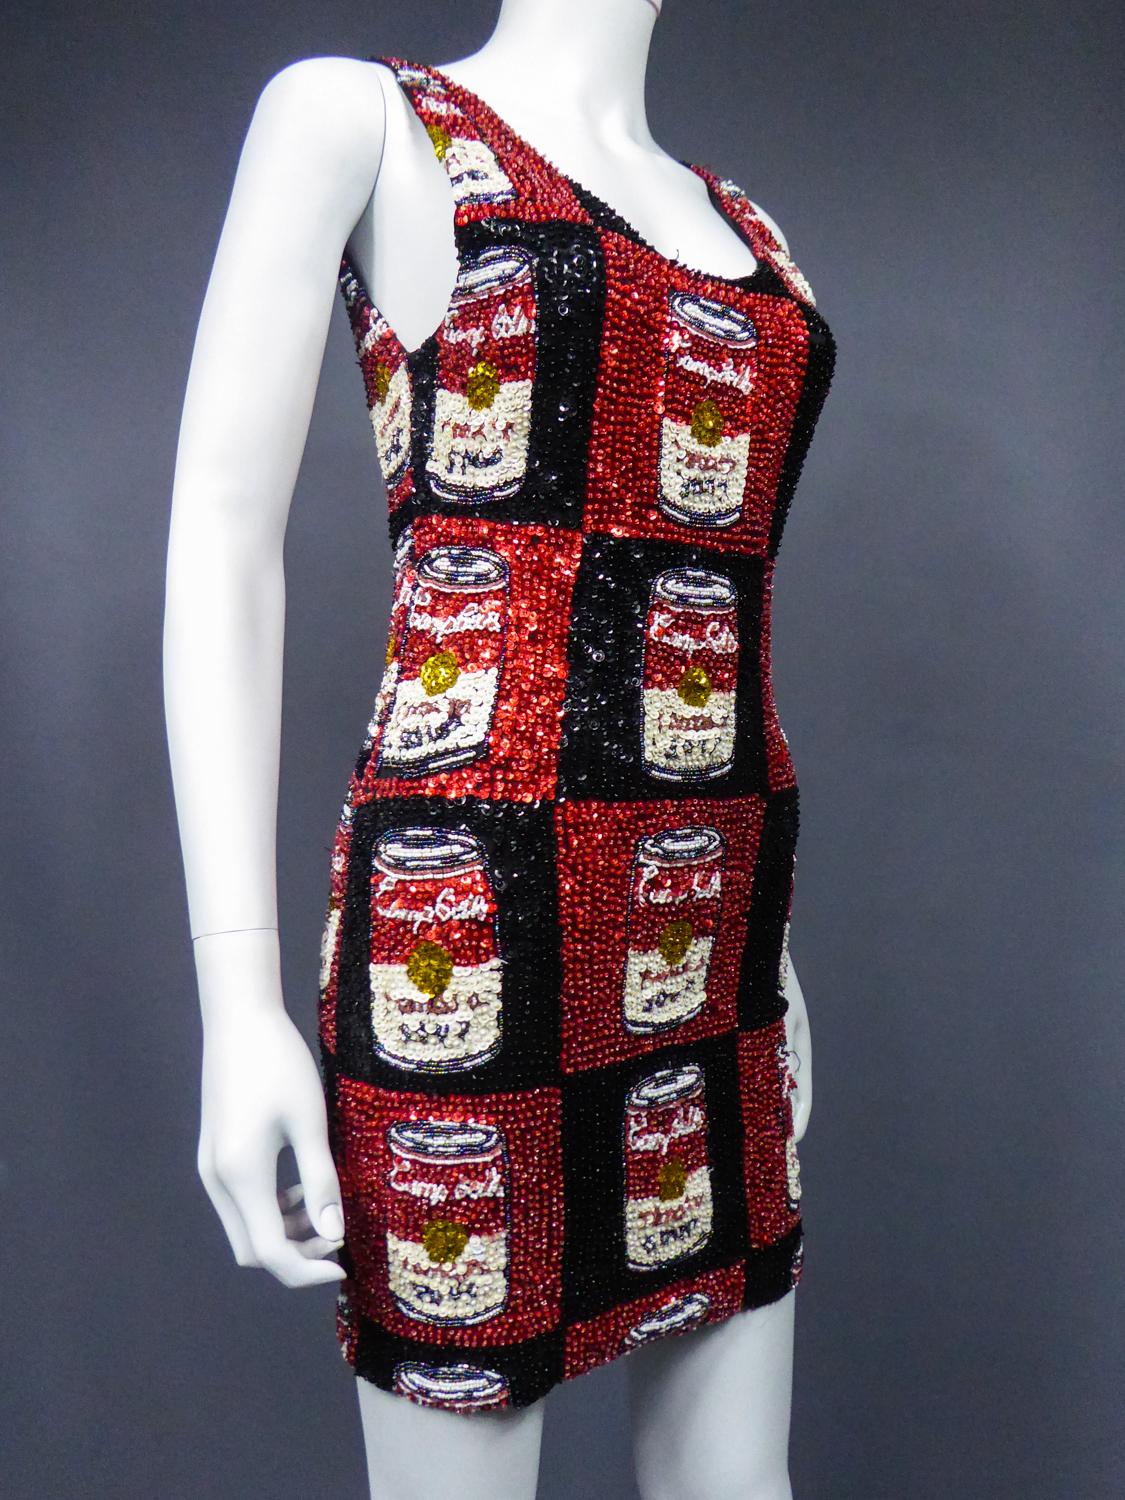 Women's A Campbell's Soup Embroidered Mini Dress Andy Warhol Pink Soda Circa 1990